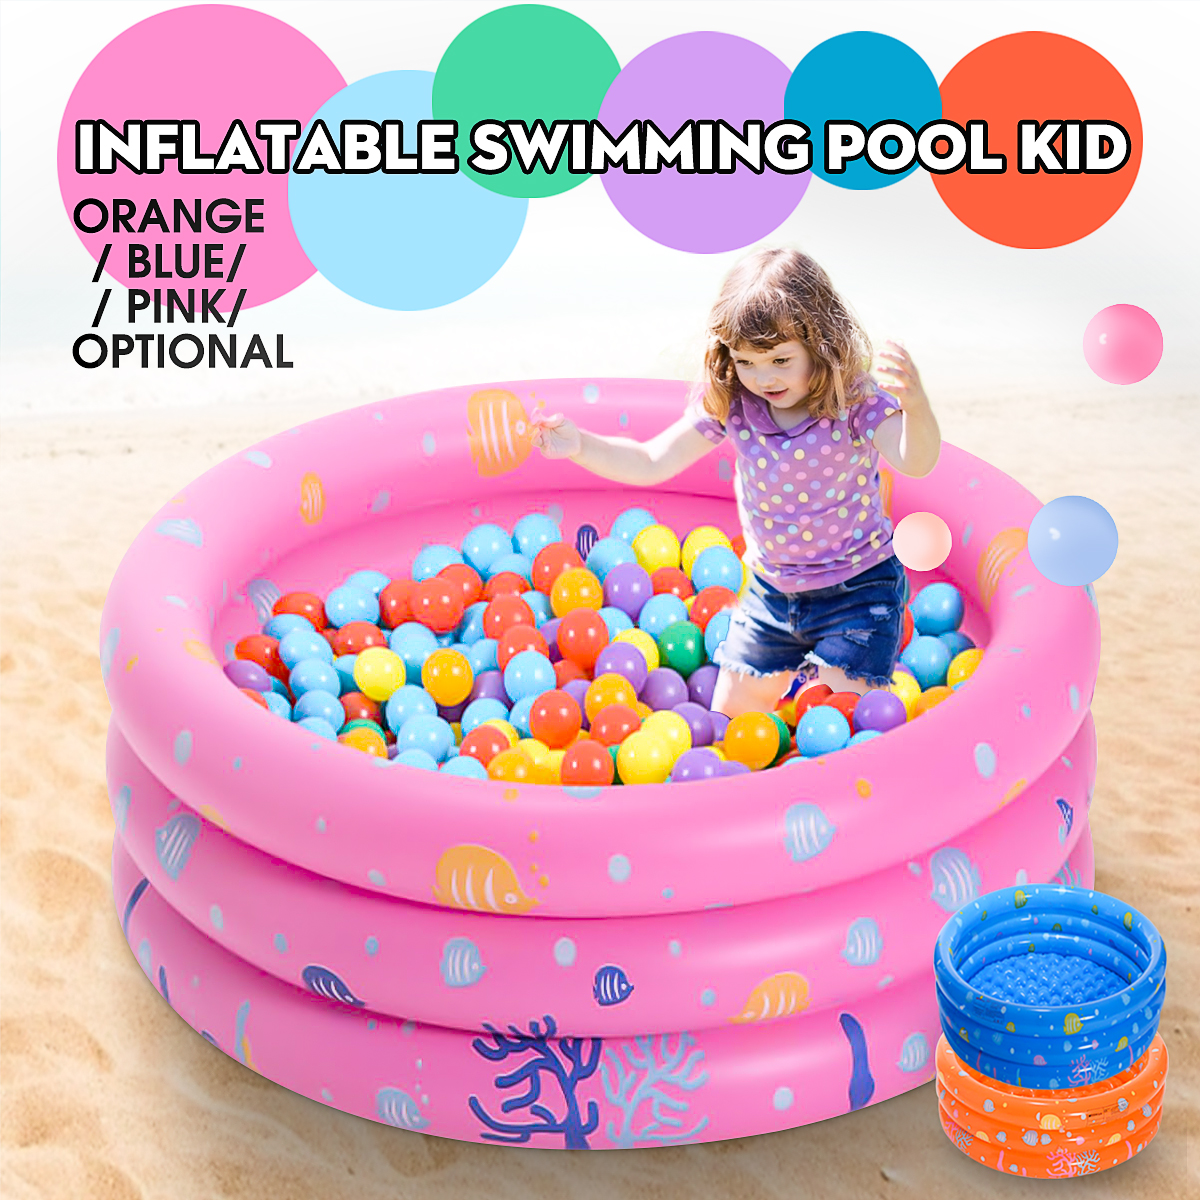 Inflatable-Swimming-Pool-Portable-Outdoor-Children-Basin-Bathtub-Kids-Pool-Baby-Swimming-Pool-Water--1528022-1